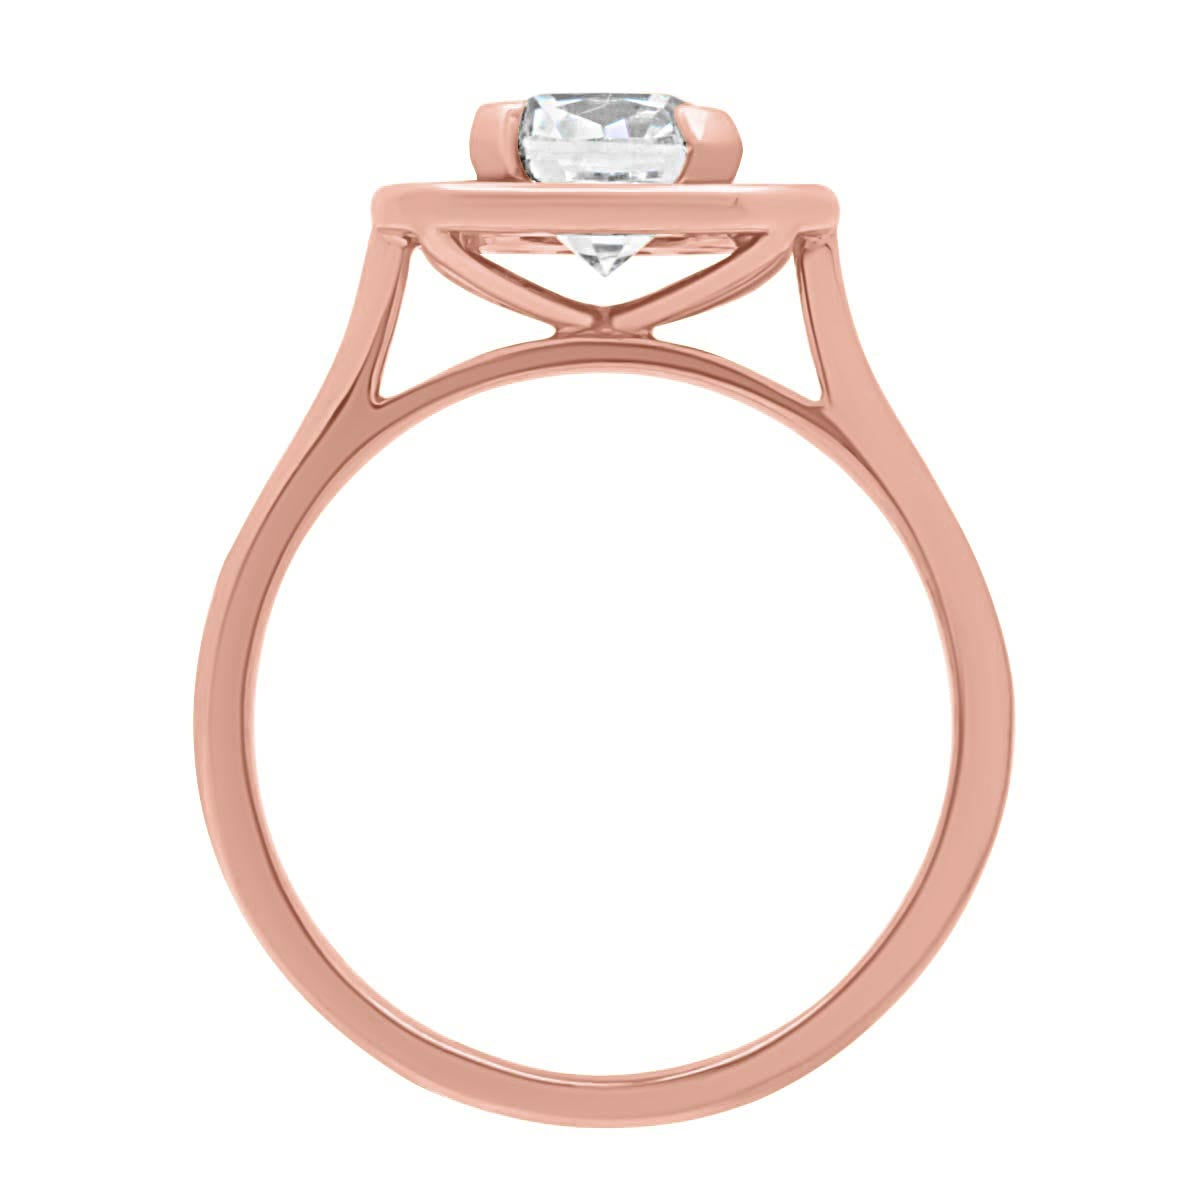 Cushion Cut Diamond Antique Diamond Ring in rose gold in upright position